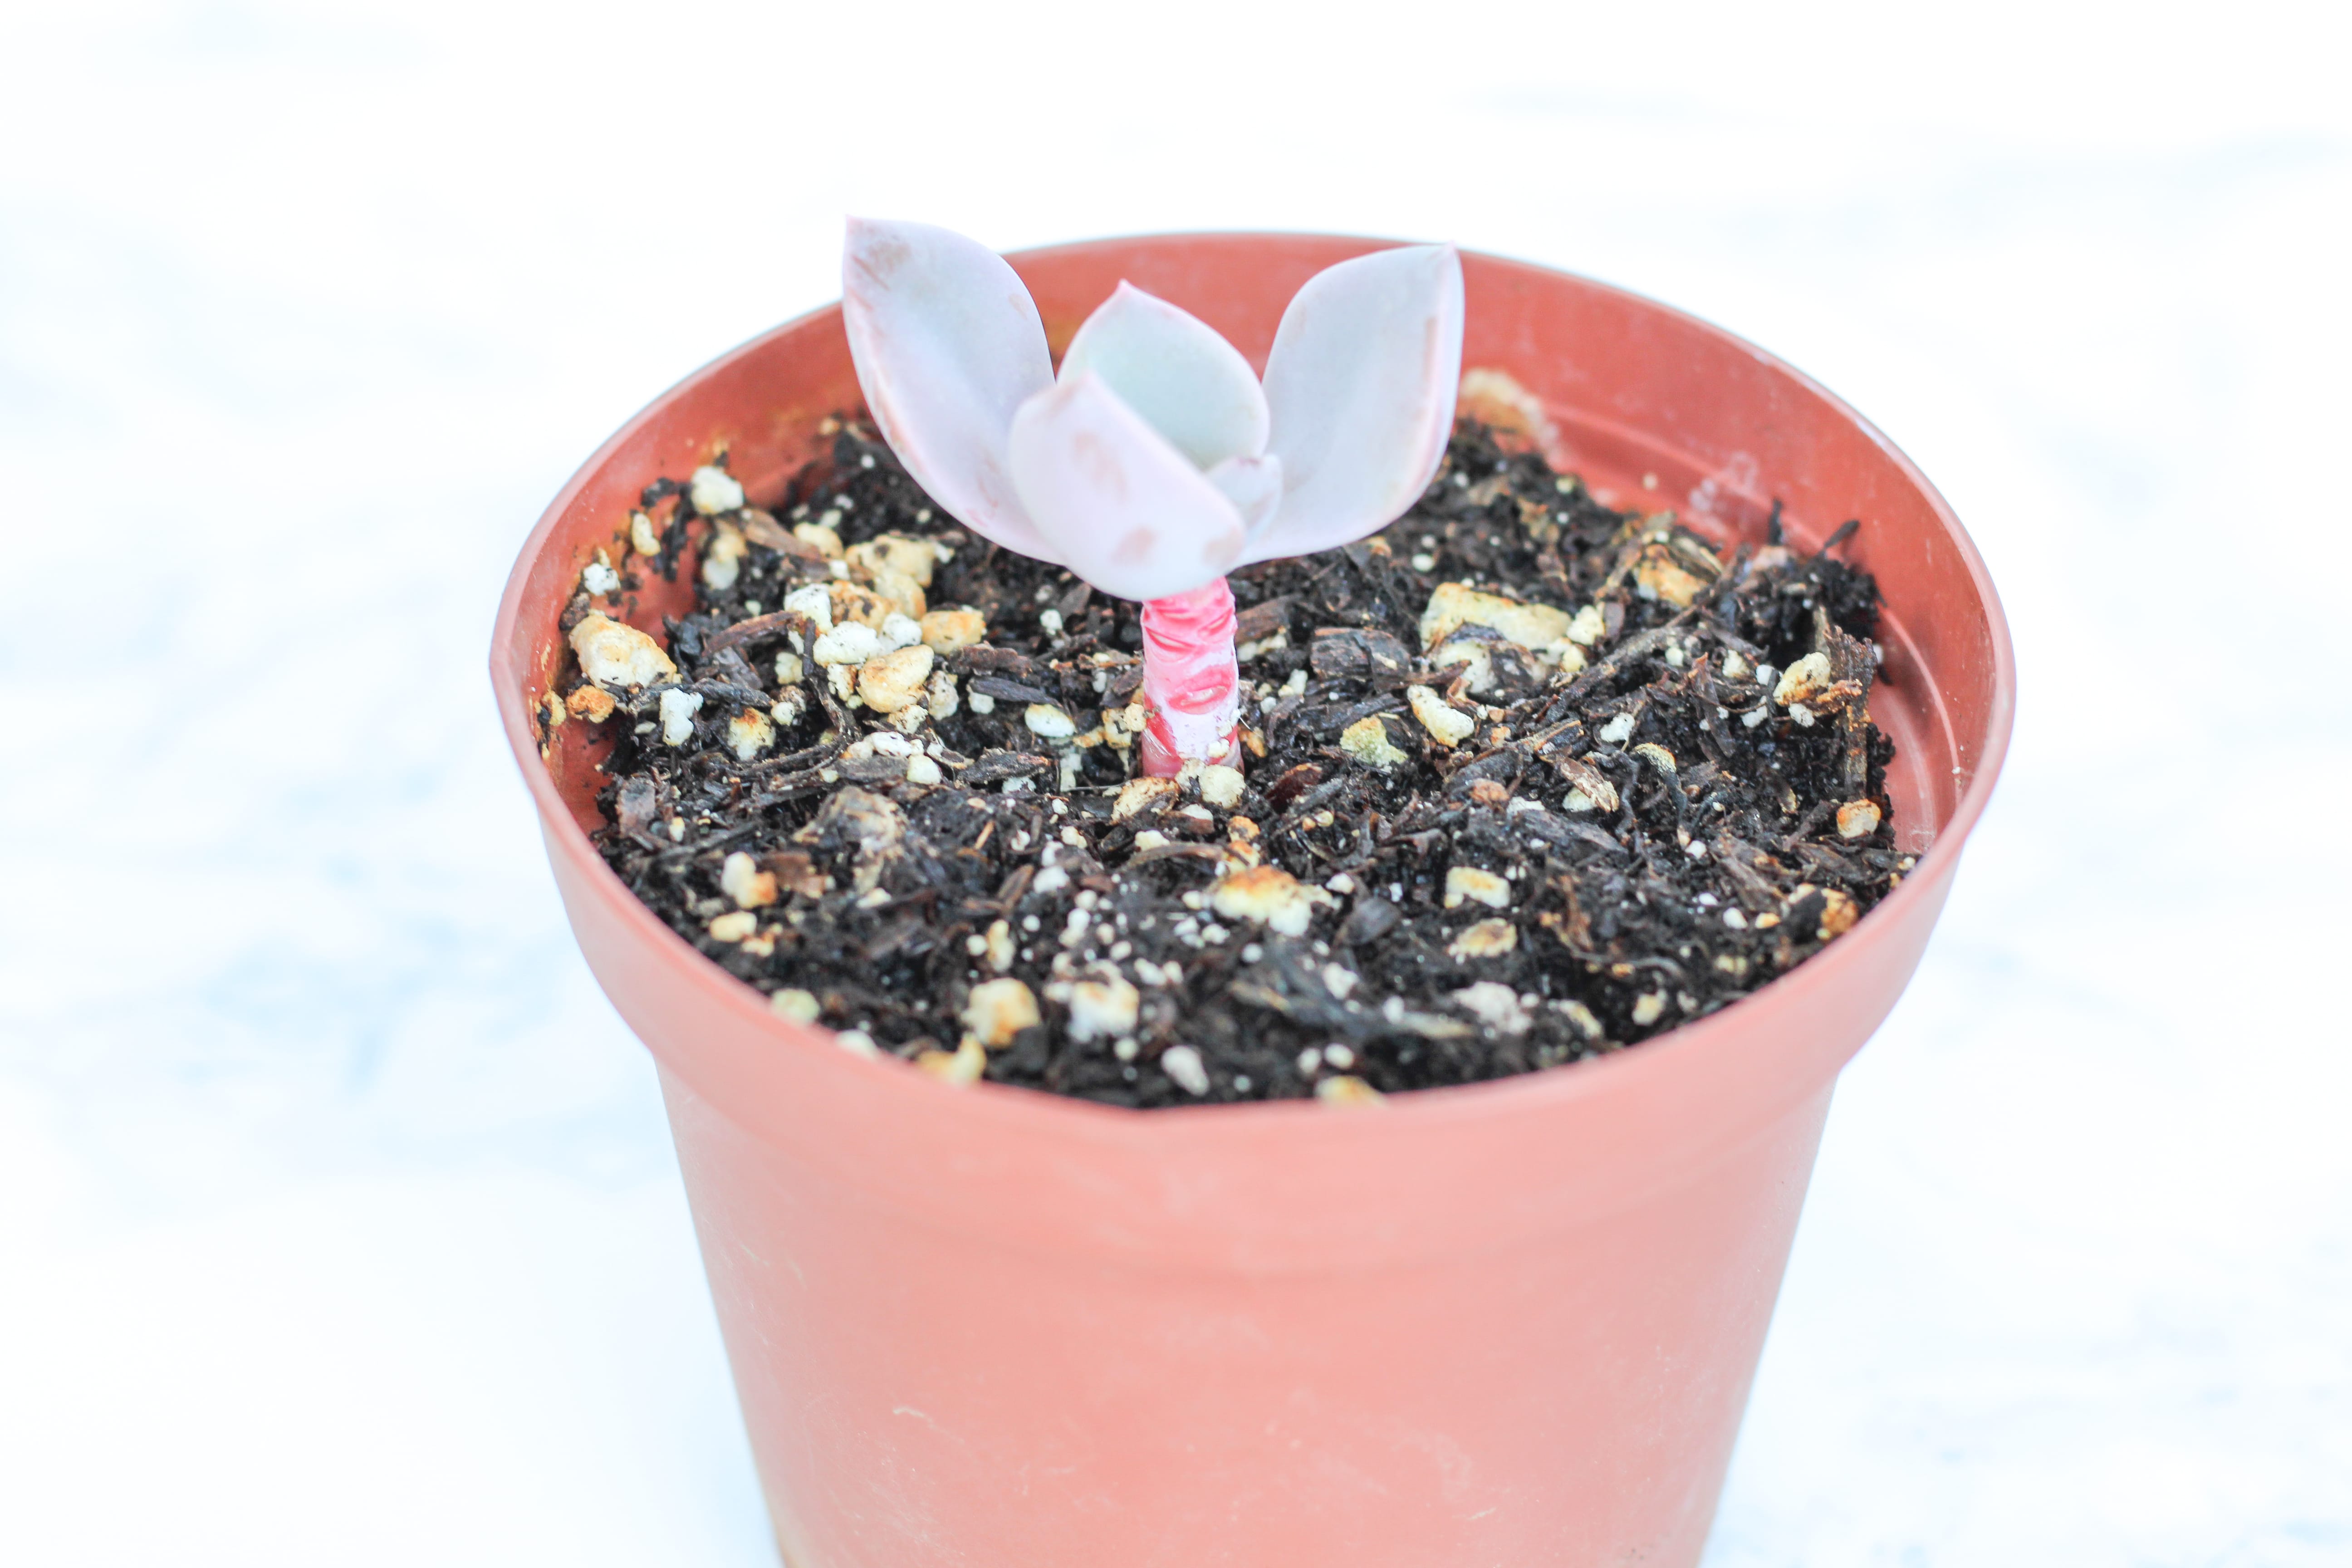 How to Propagate Succulents from Leaves